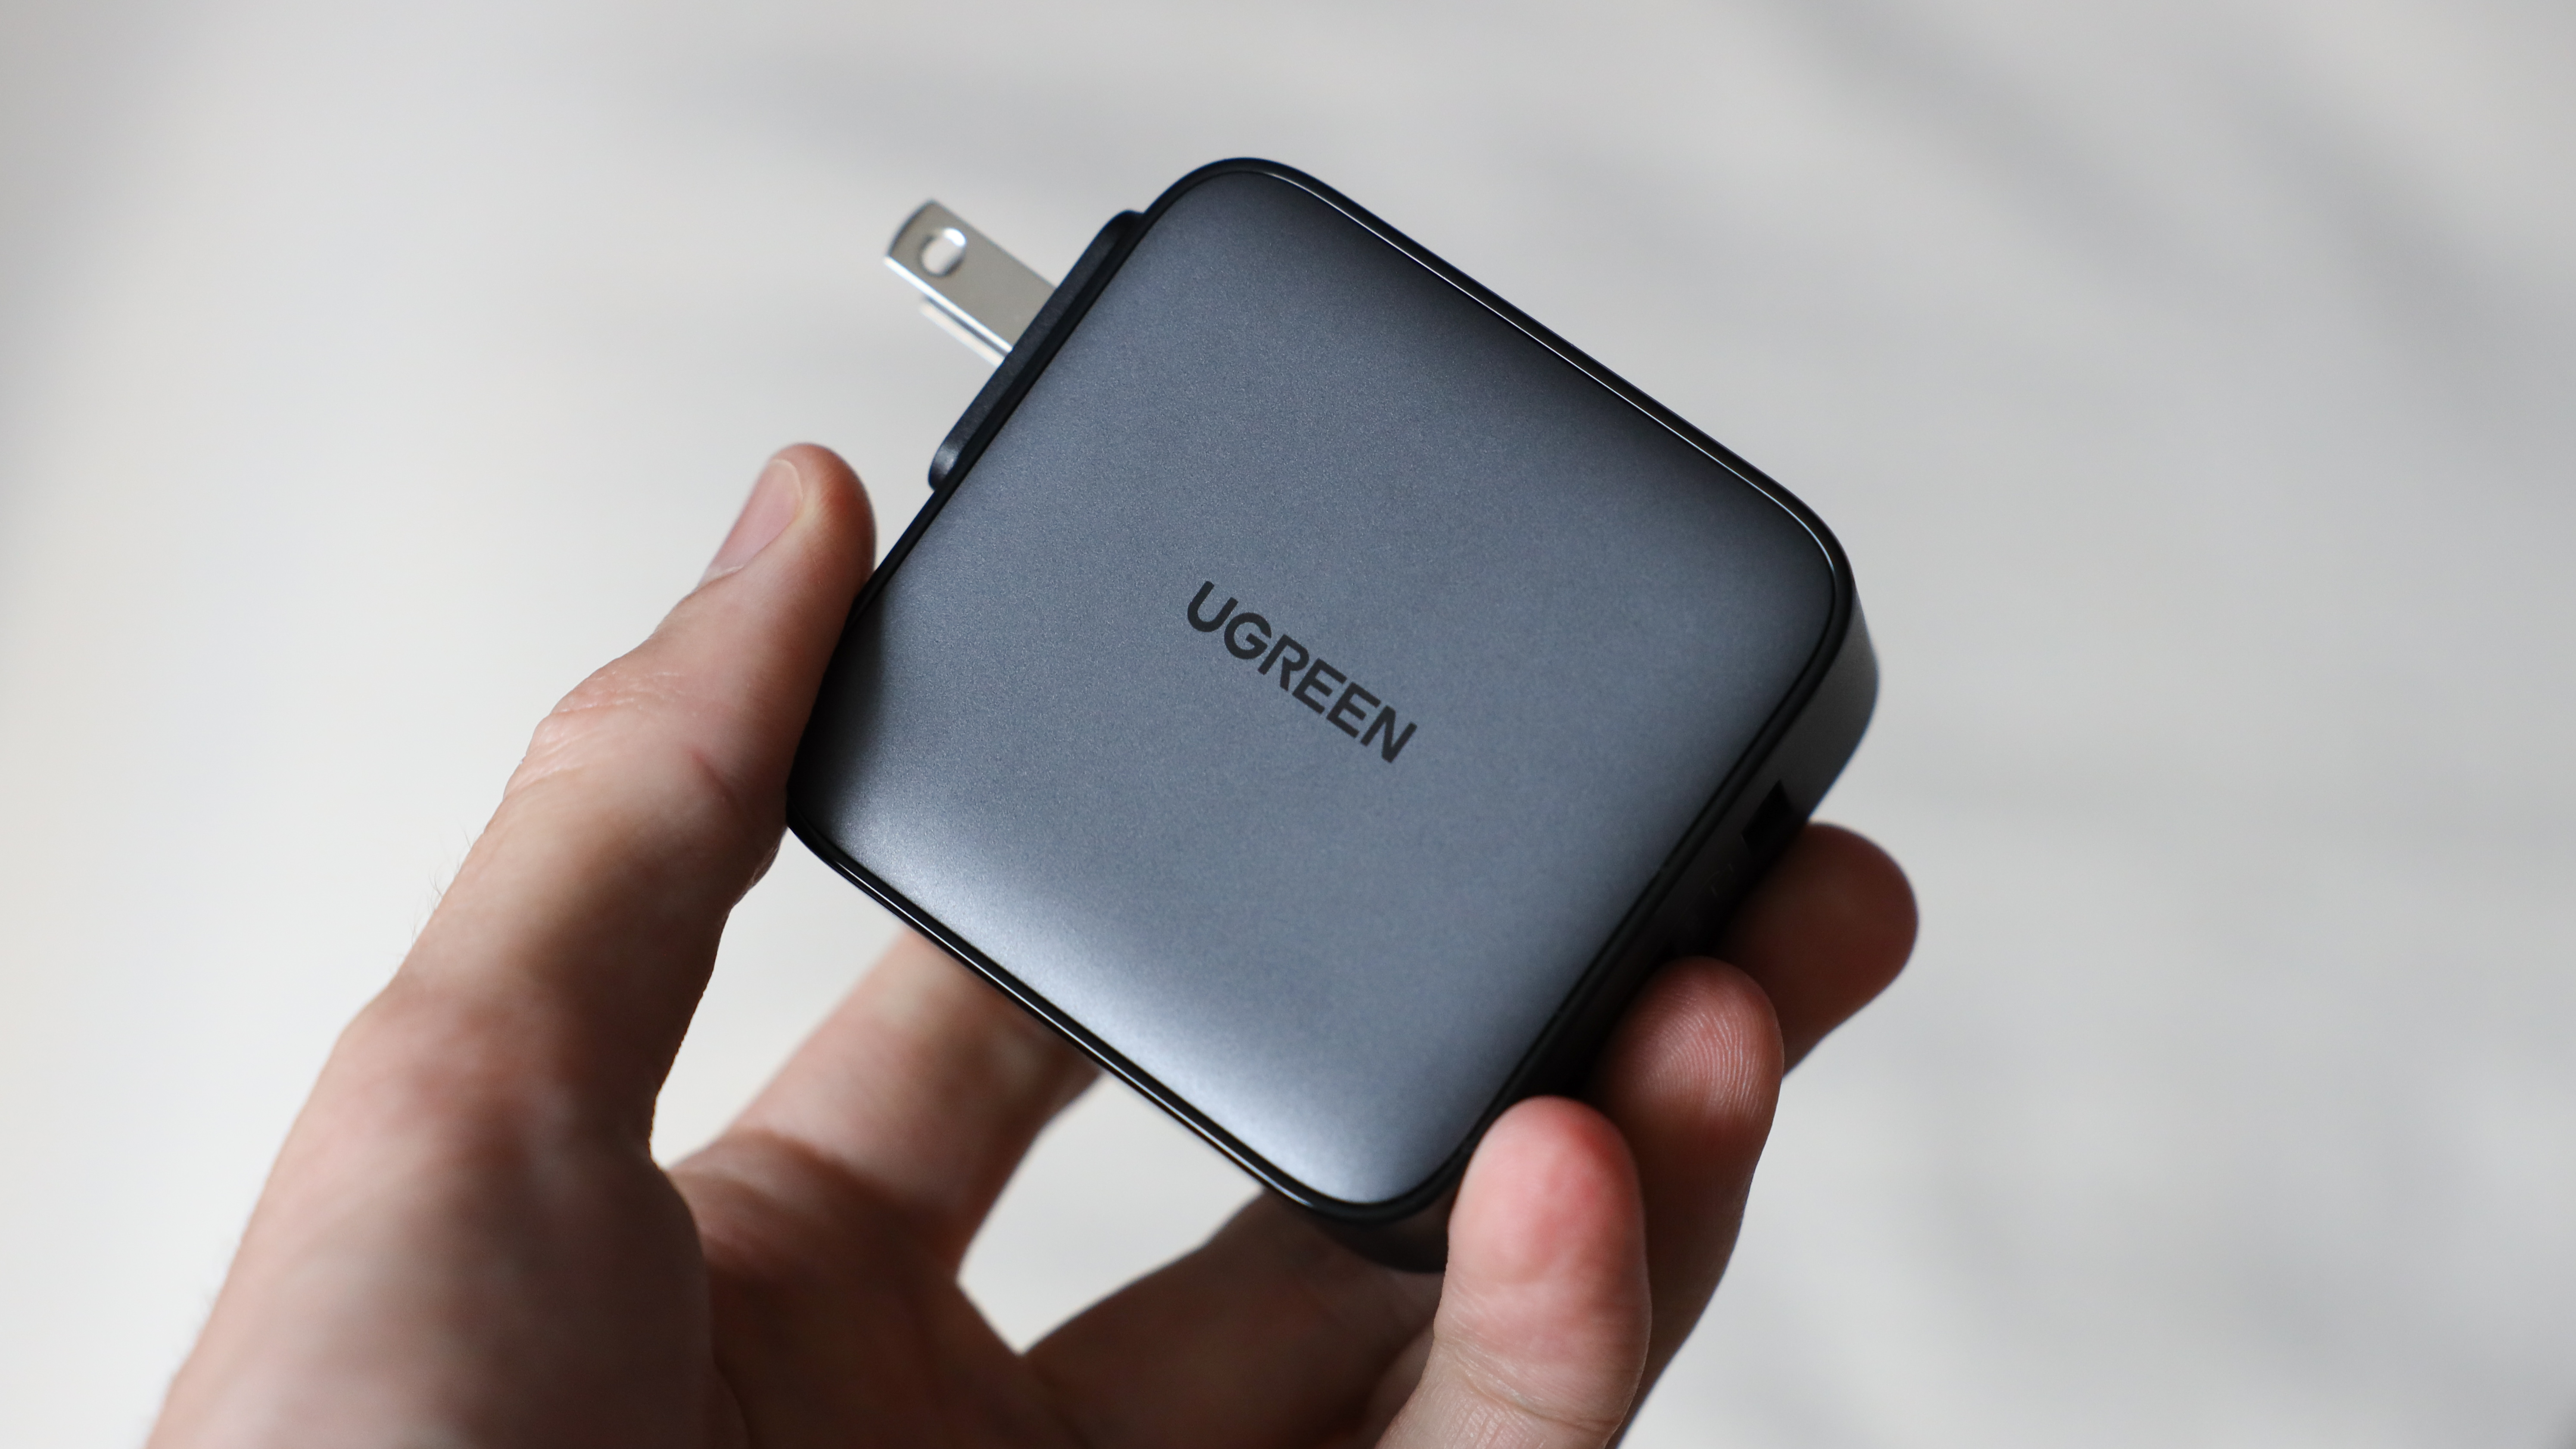 Ugreen on X: If you've always wished your power bank could charge more  than just your phone then you've got to meet Ugreen's new 145W power bank,  which has enough juice to